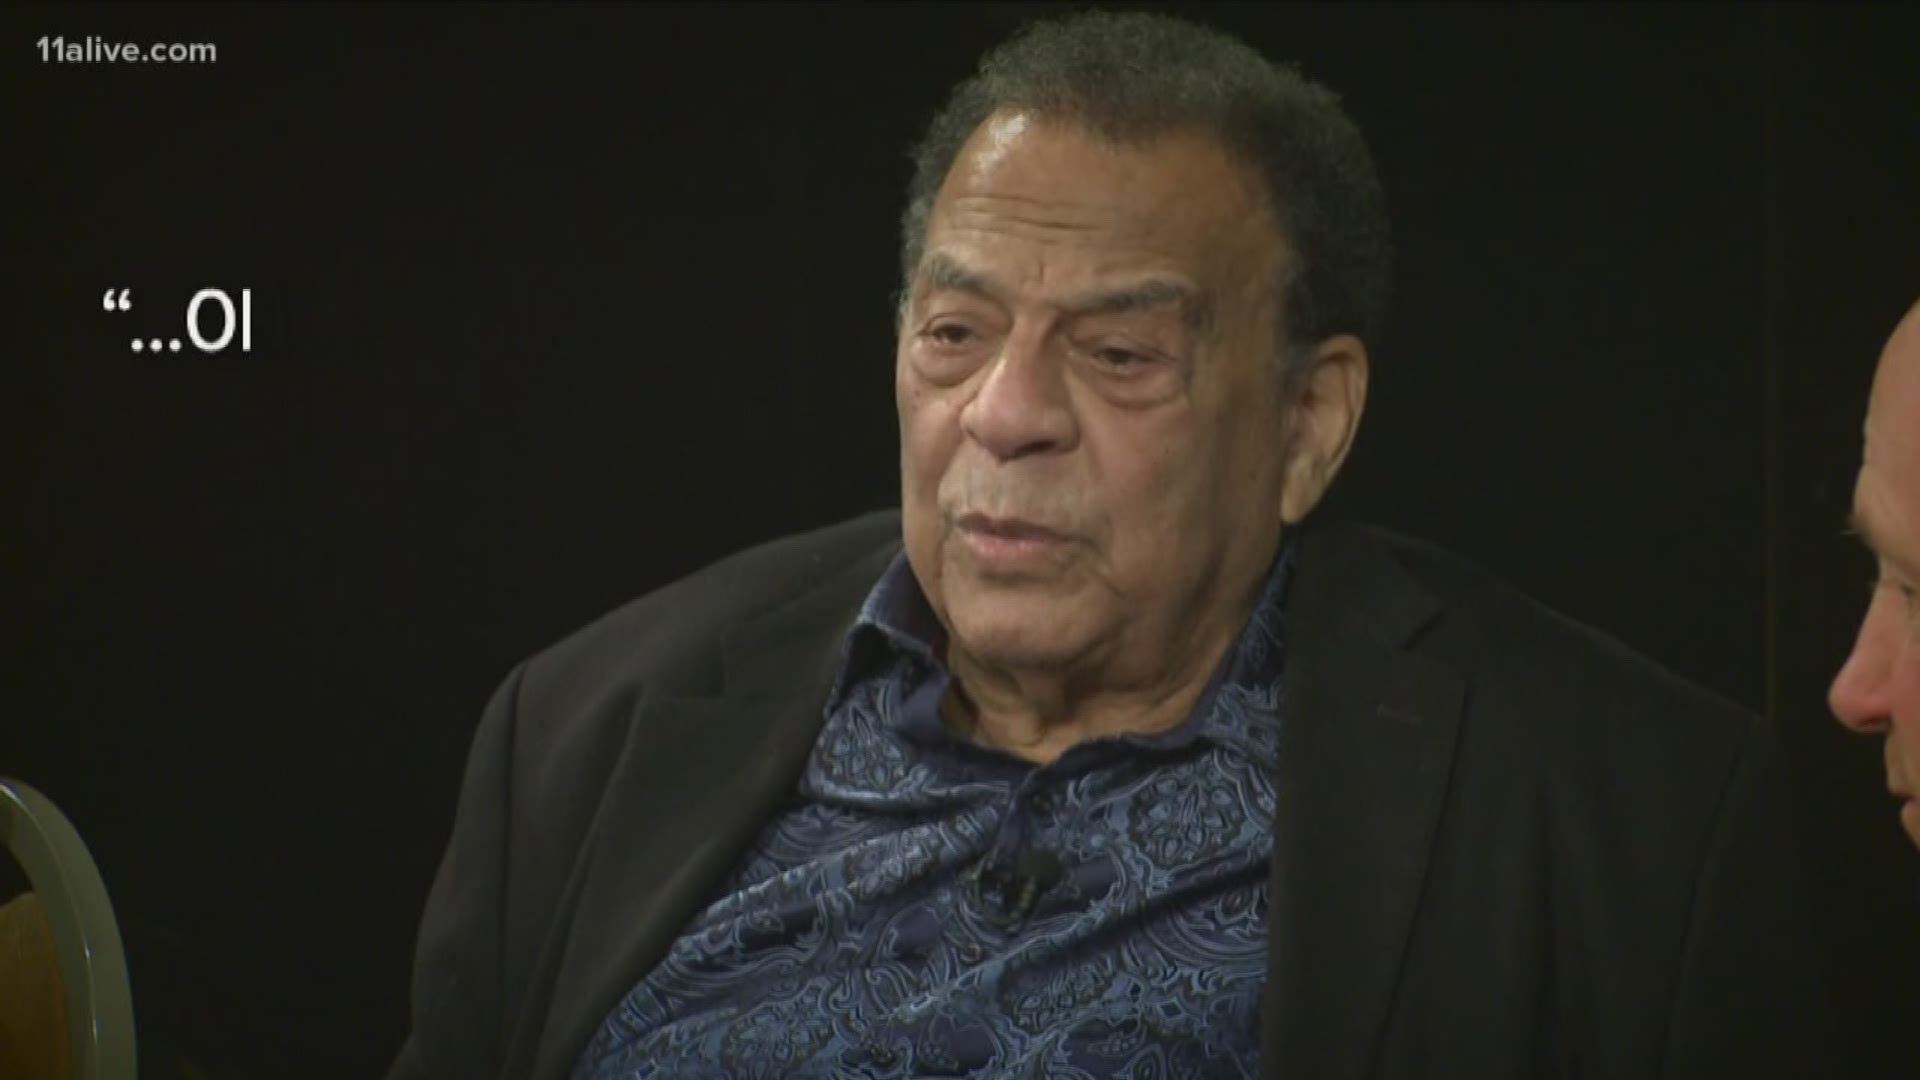 ATL Culture has an intimate conversation with Ambassador Andrew Young and students in the Atlanta University Center.